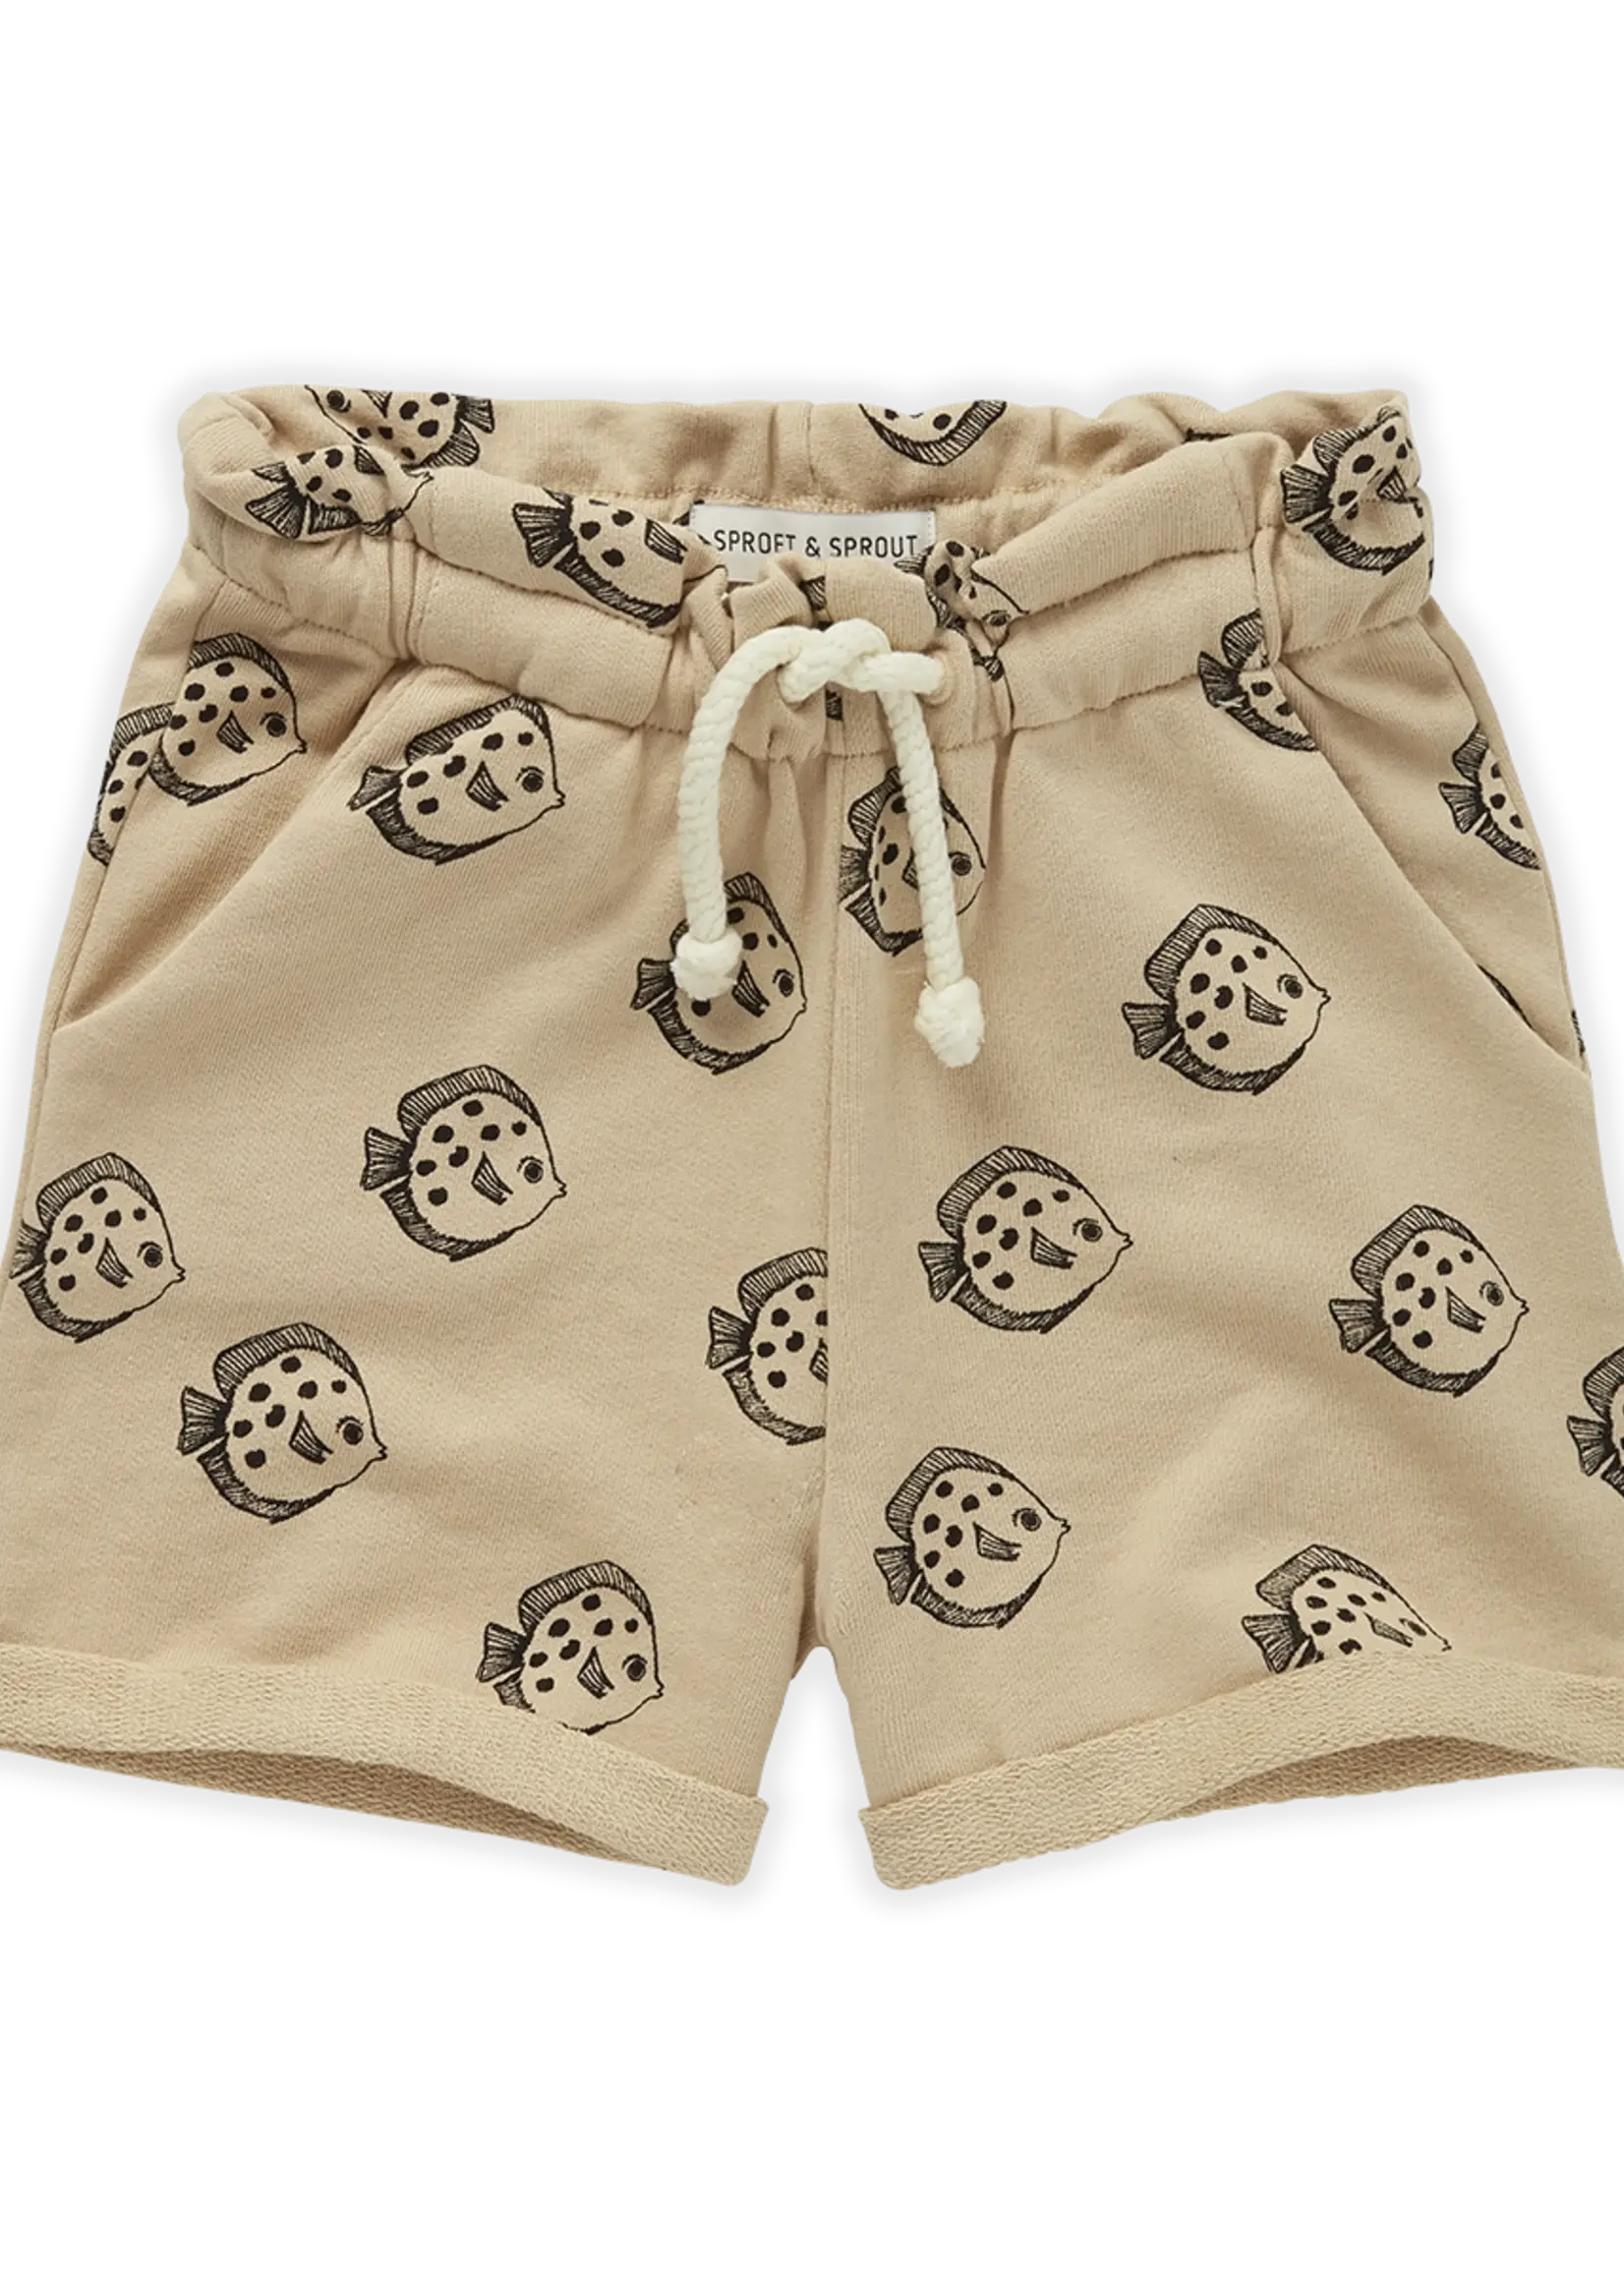 Sproet en Sprout Chino short fish print biscotti brown - Sproet & Sprout